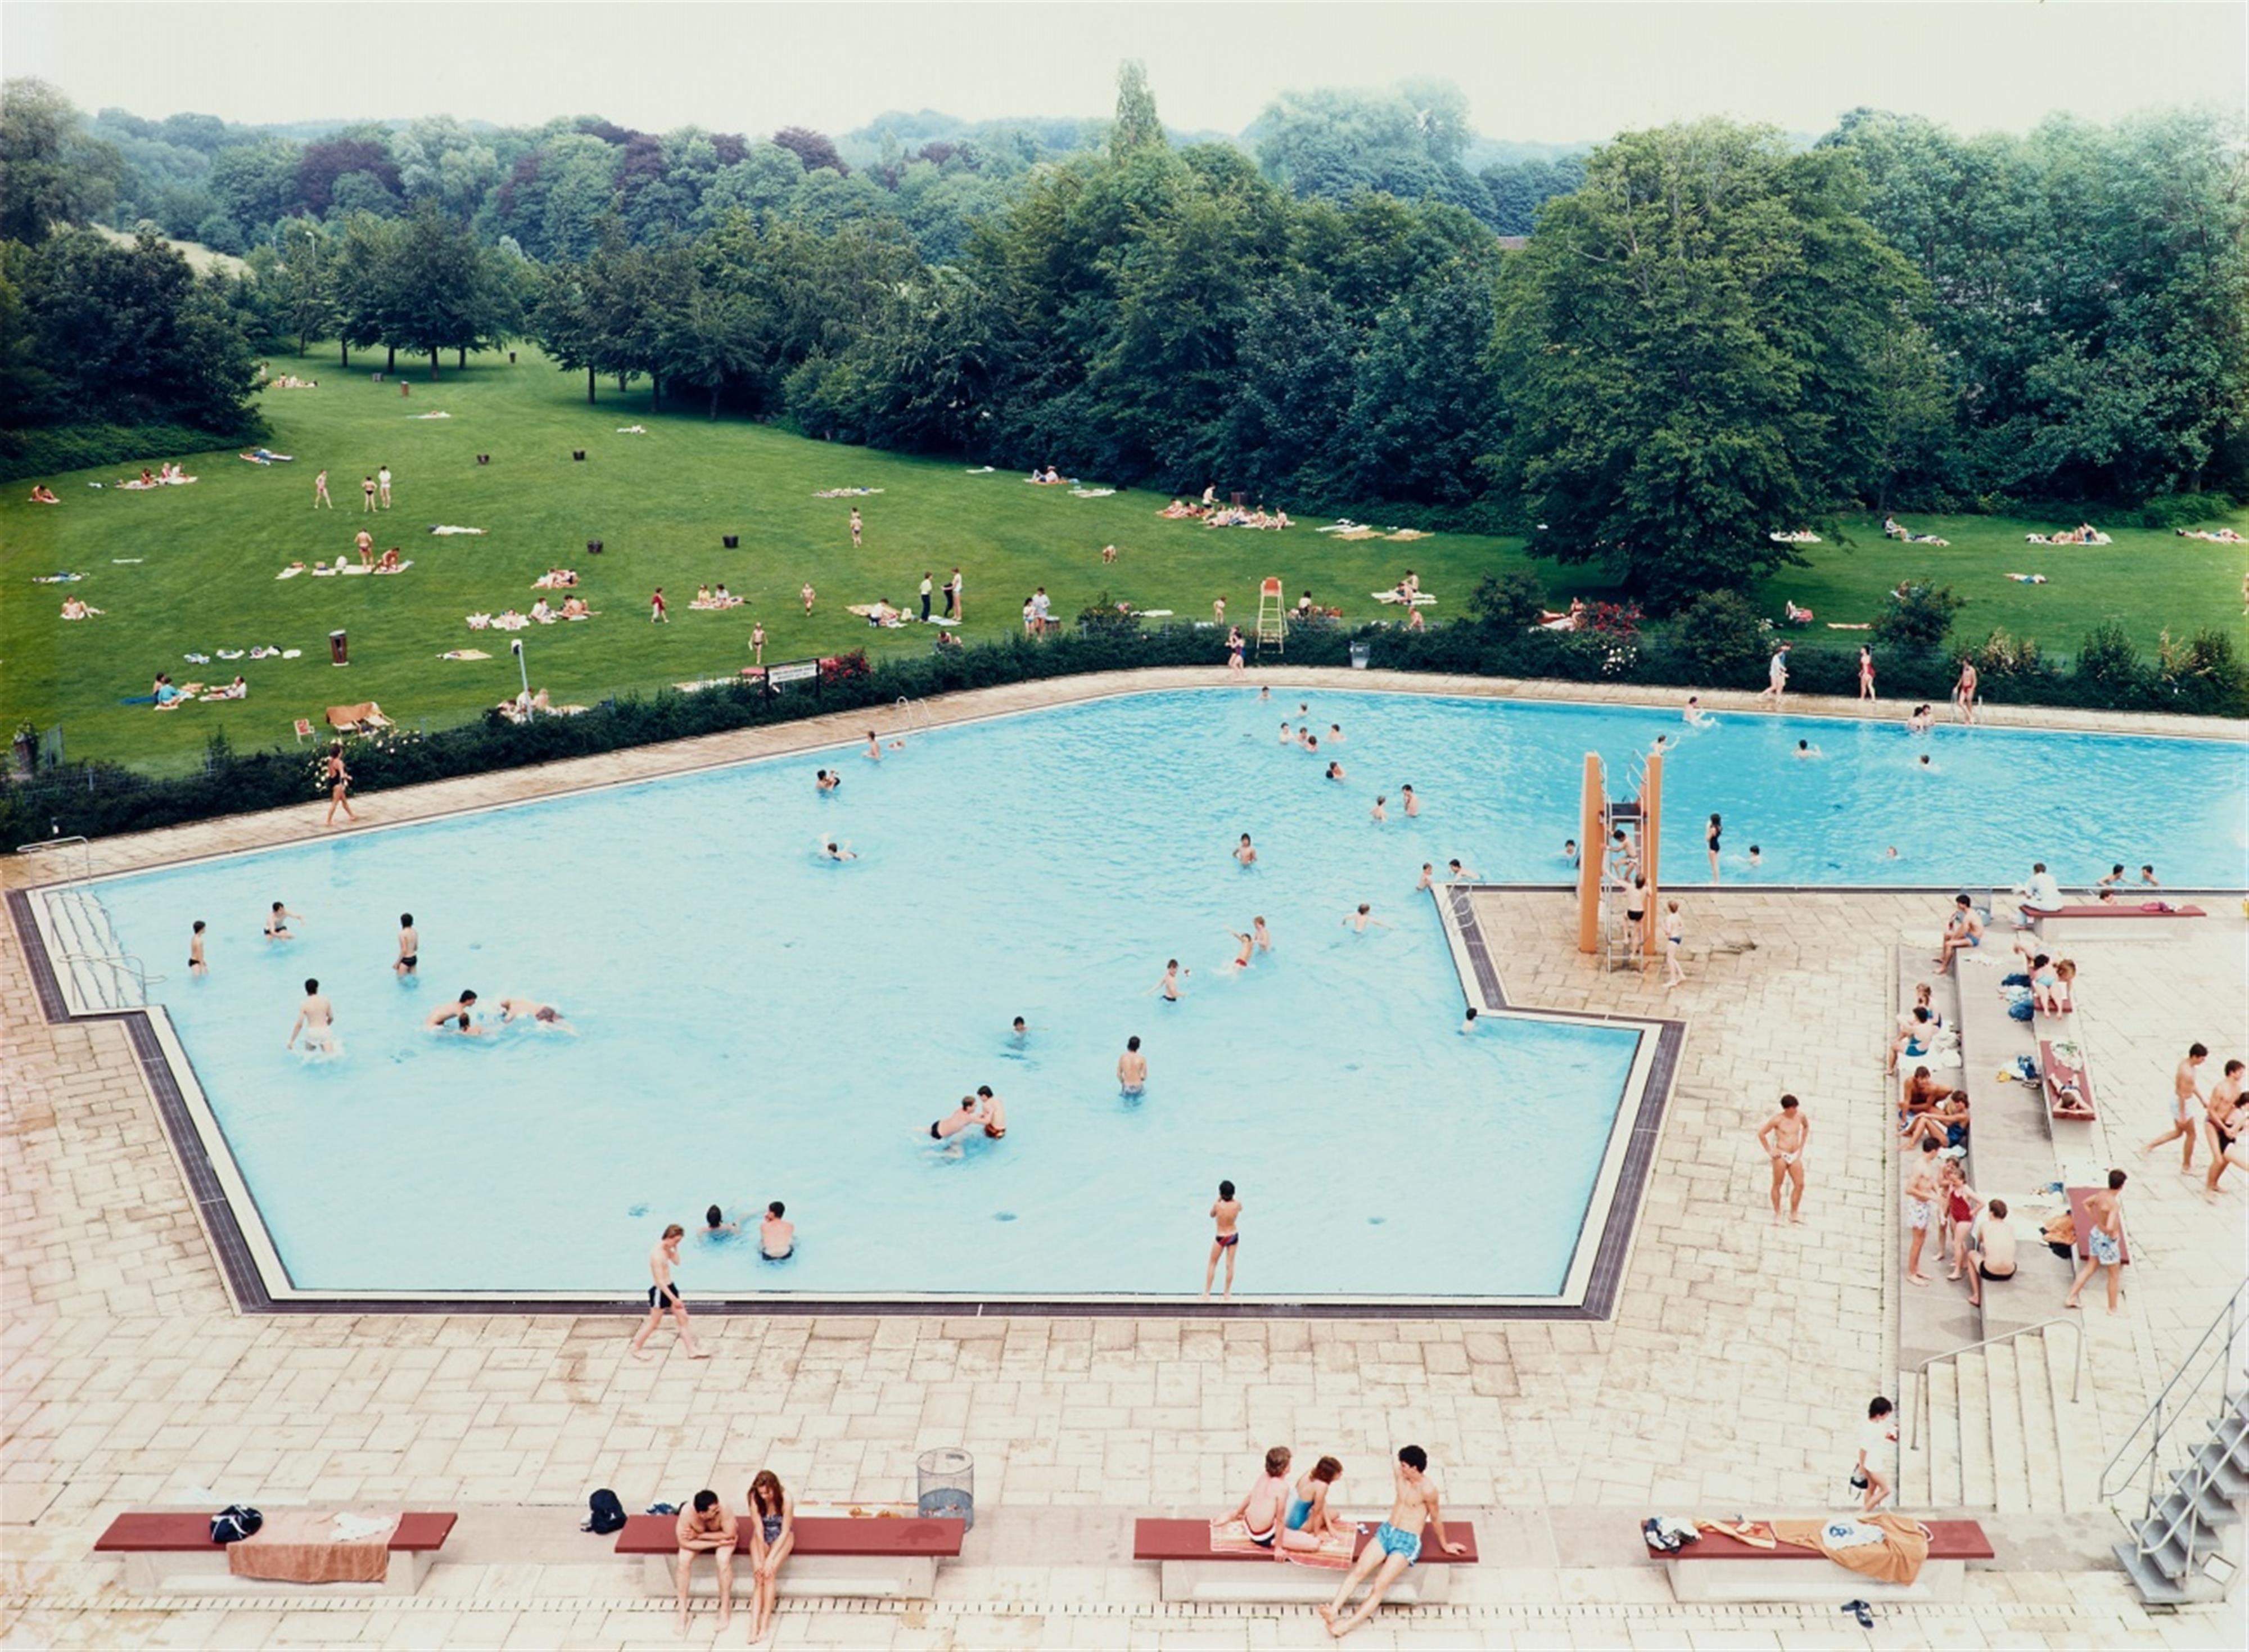 Andreas Gursky - Schwimmbad Ratingen - image-1